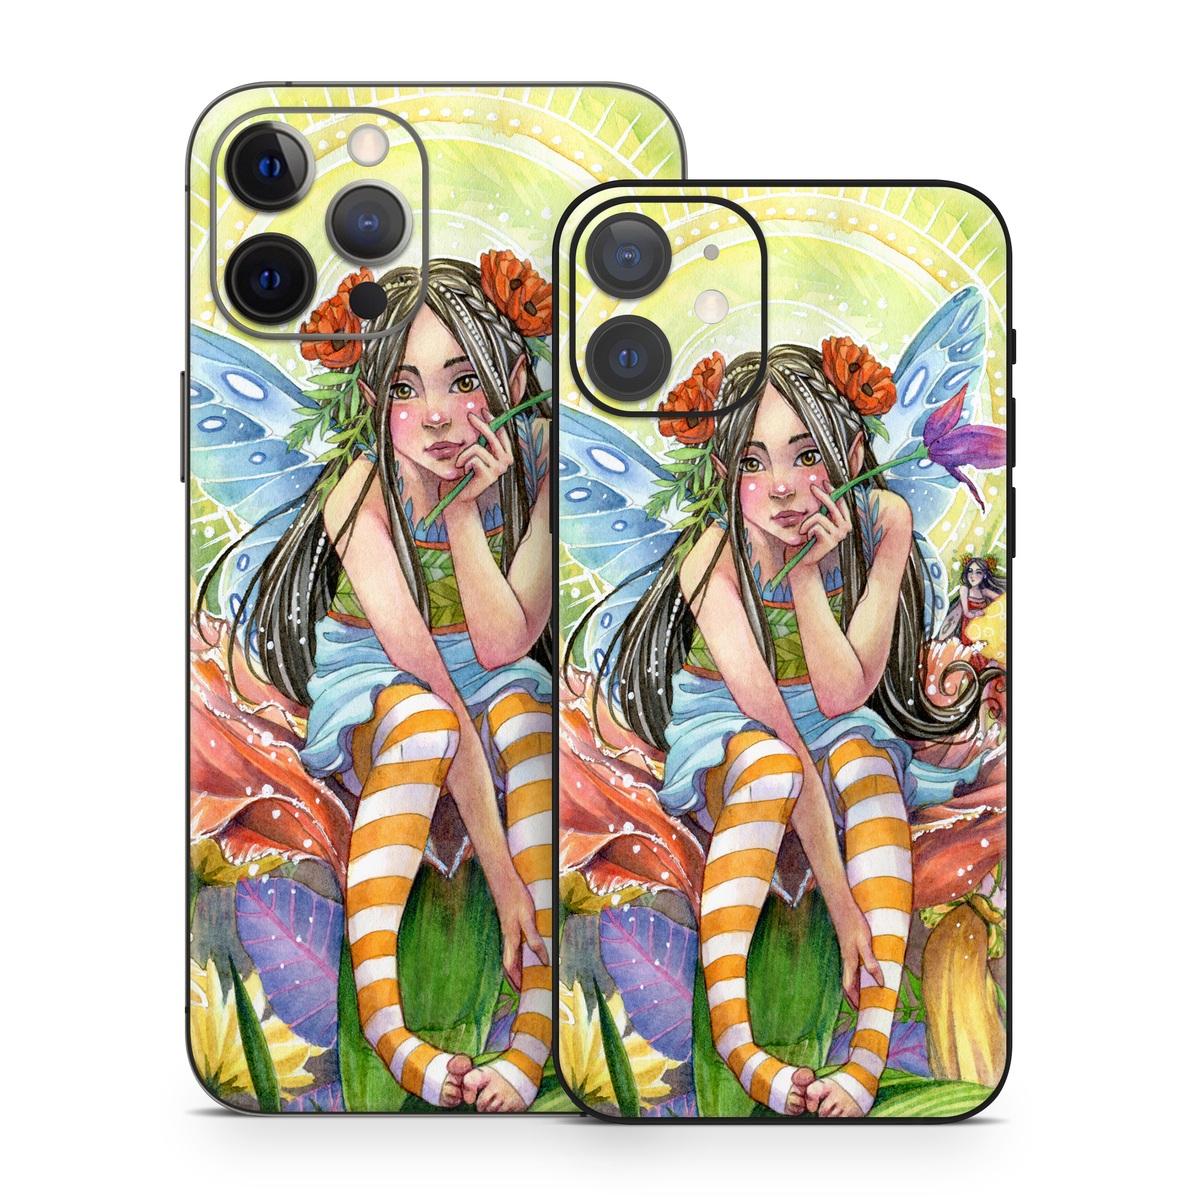 iPhone 12 Series Skin design of Fictional character, Illustration, Art, Plant, Painting, Wildflower, Mythical creature, with gray, green, black, yellow, red colors